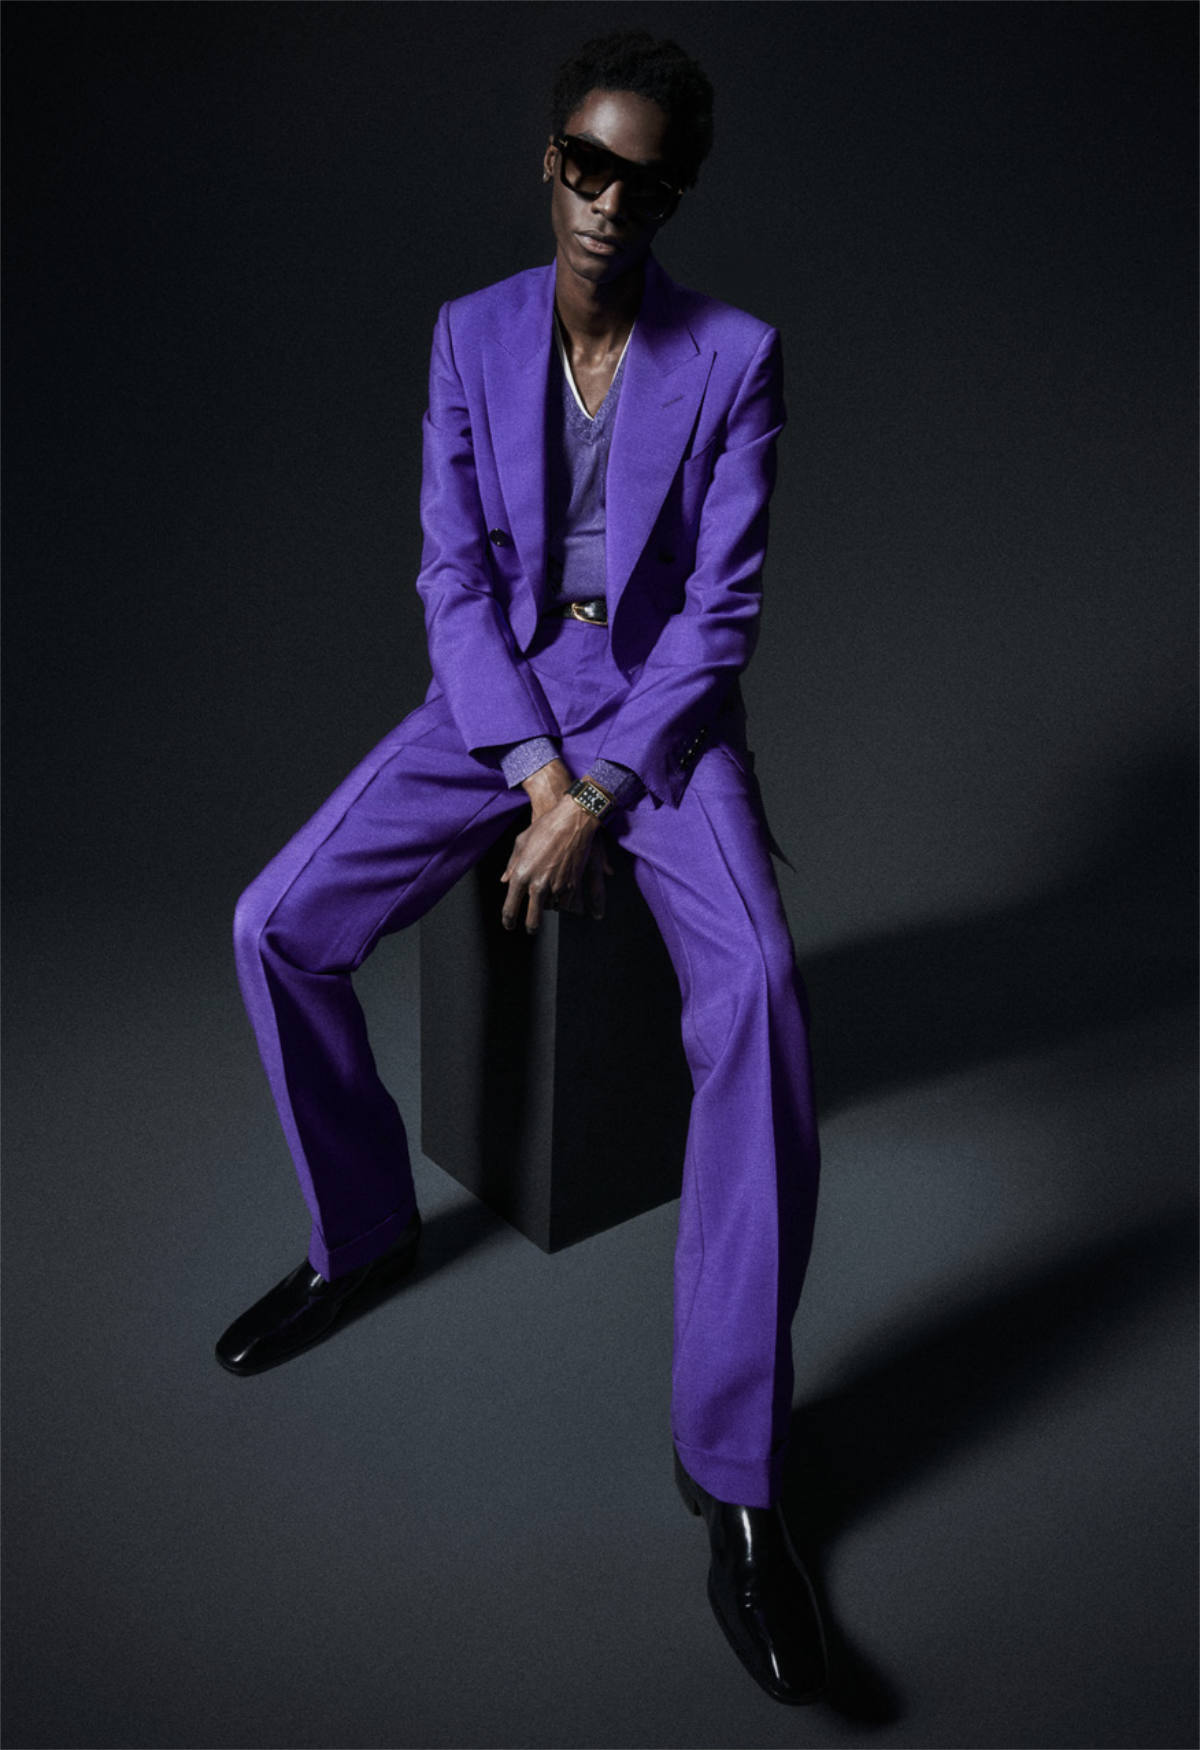 Tom Ford Presents His New Autumn/Winter 2023 Menswear Collection